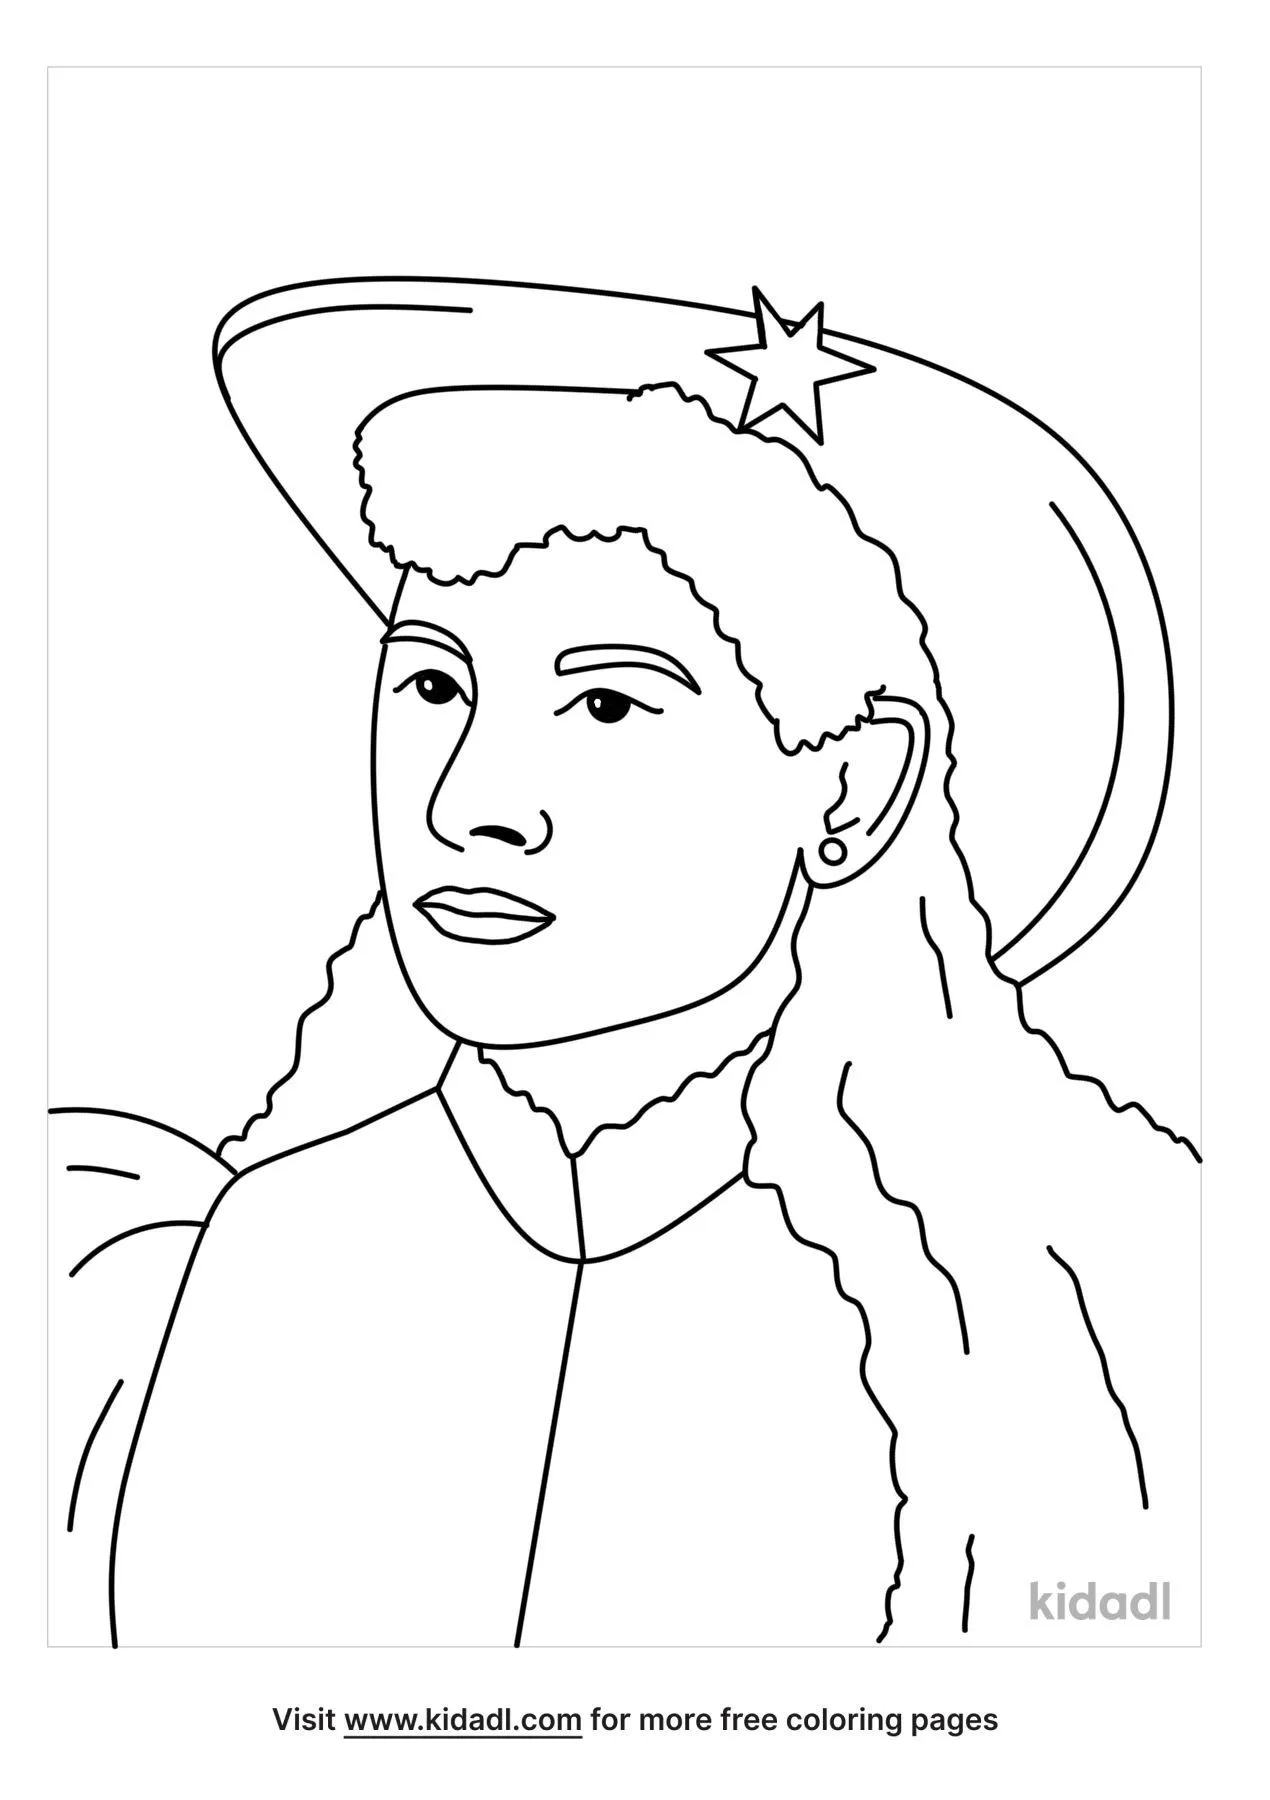 Annie Oakley Coloring Page